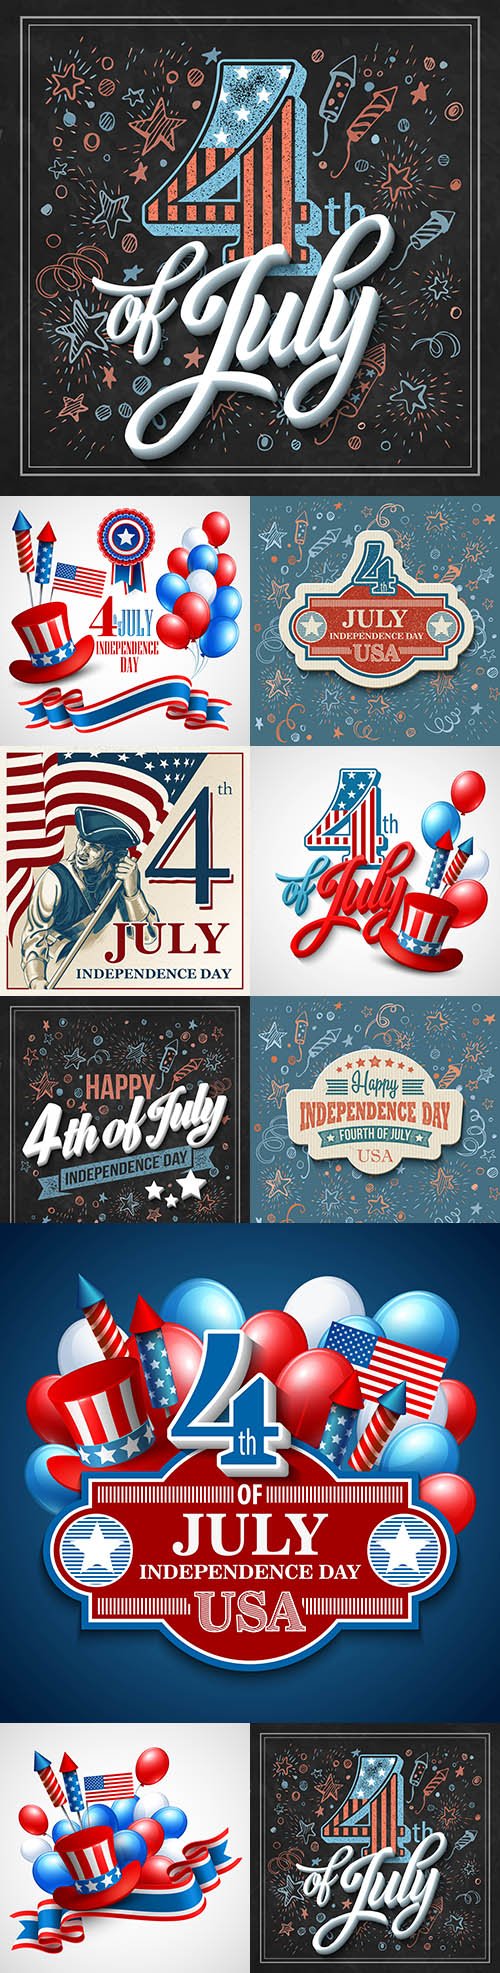 July 4 Independence Day America design illustrations